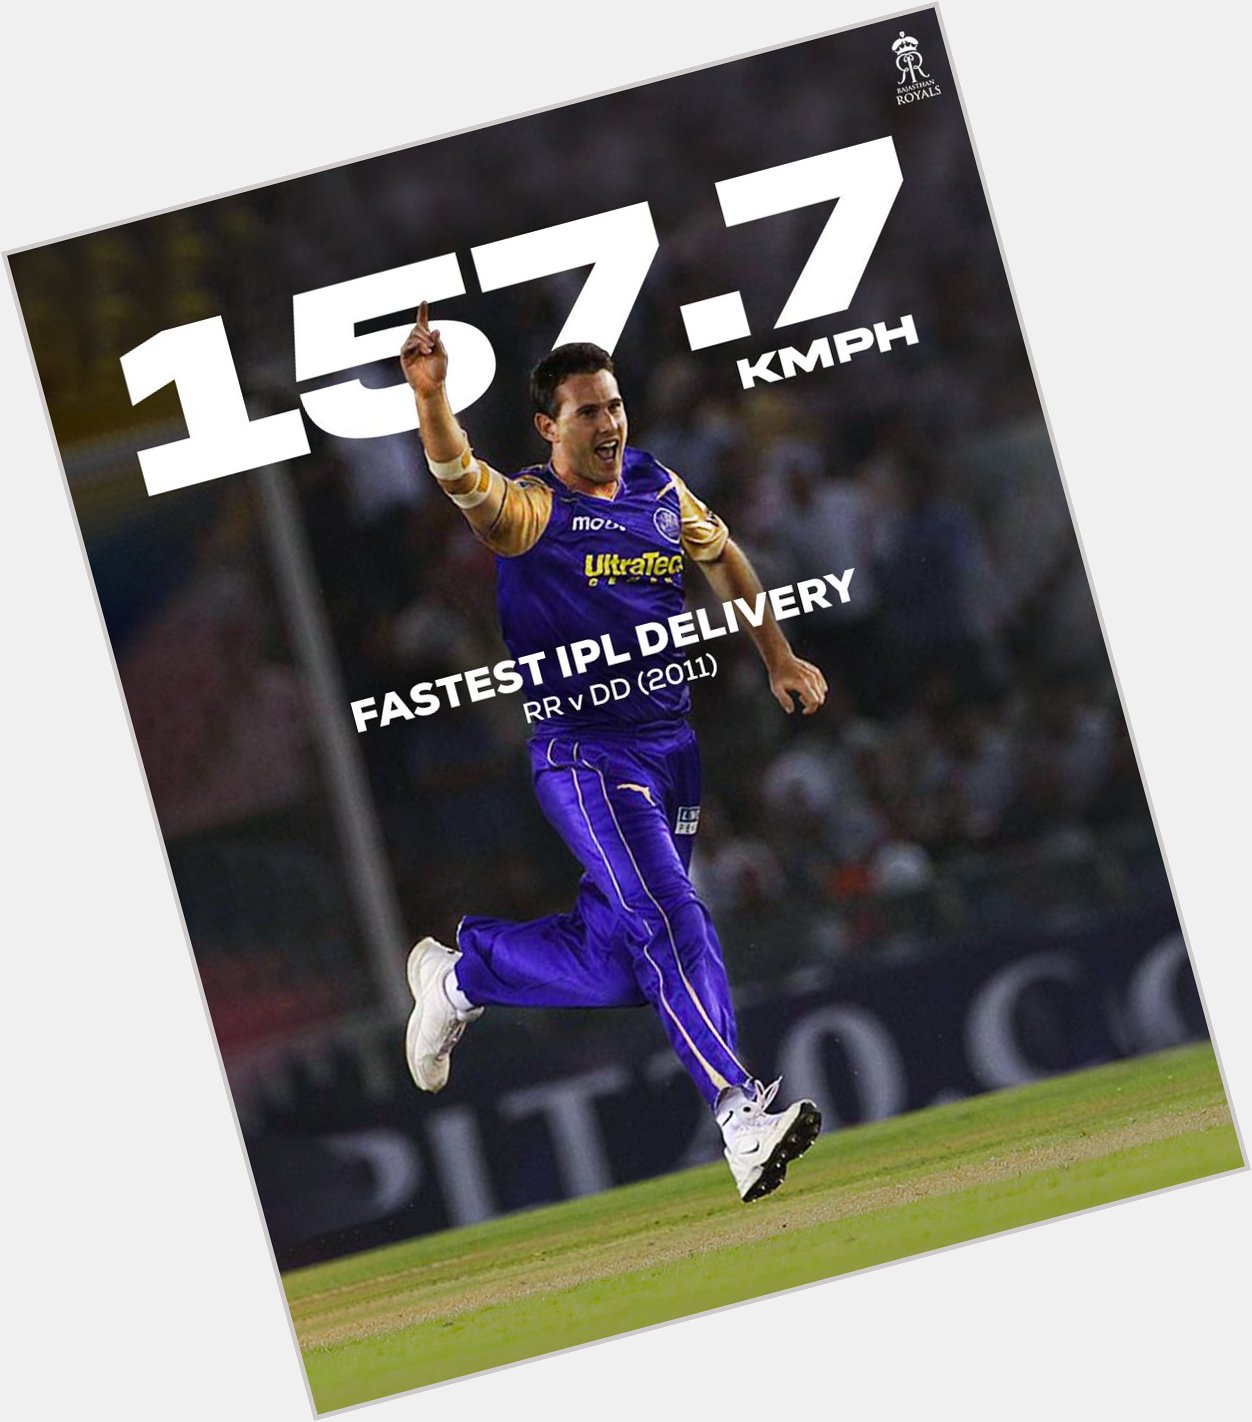 Shaun Tait was the reason why they said: blink and you miss.  Happy birthday, Shaun Tait  